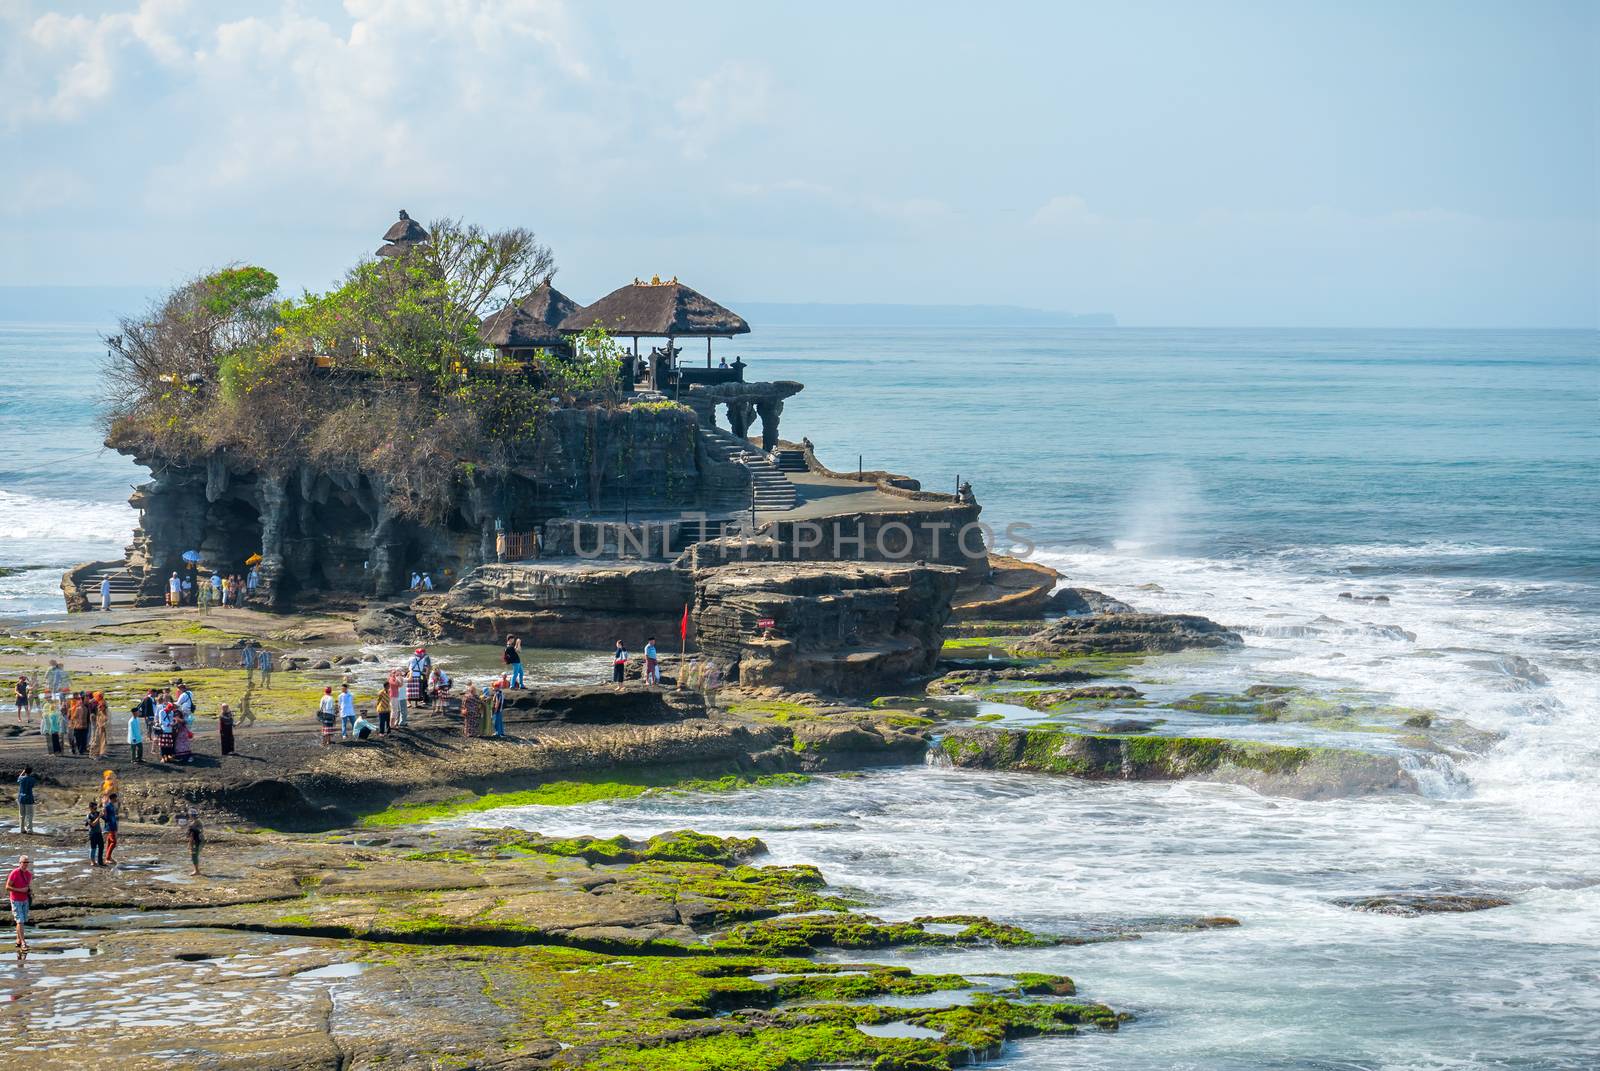 The temple "Tanah Lot" on the island of Bali by Netfalls